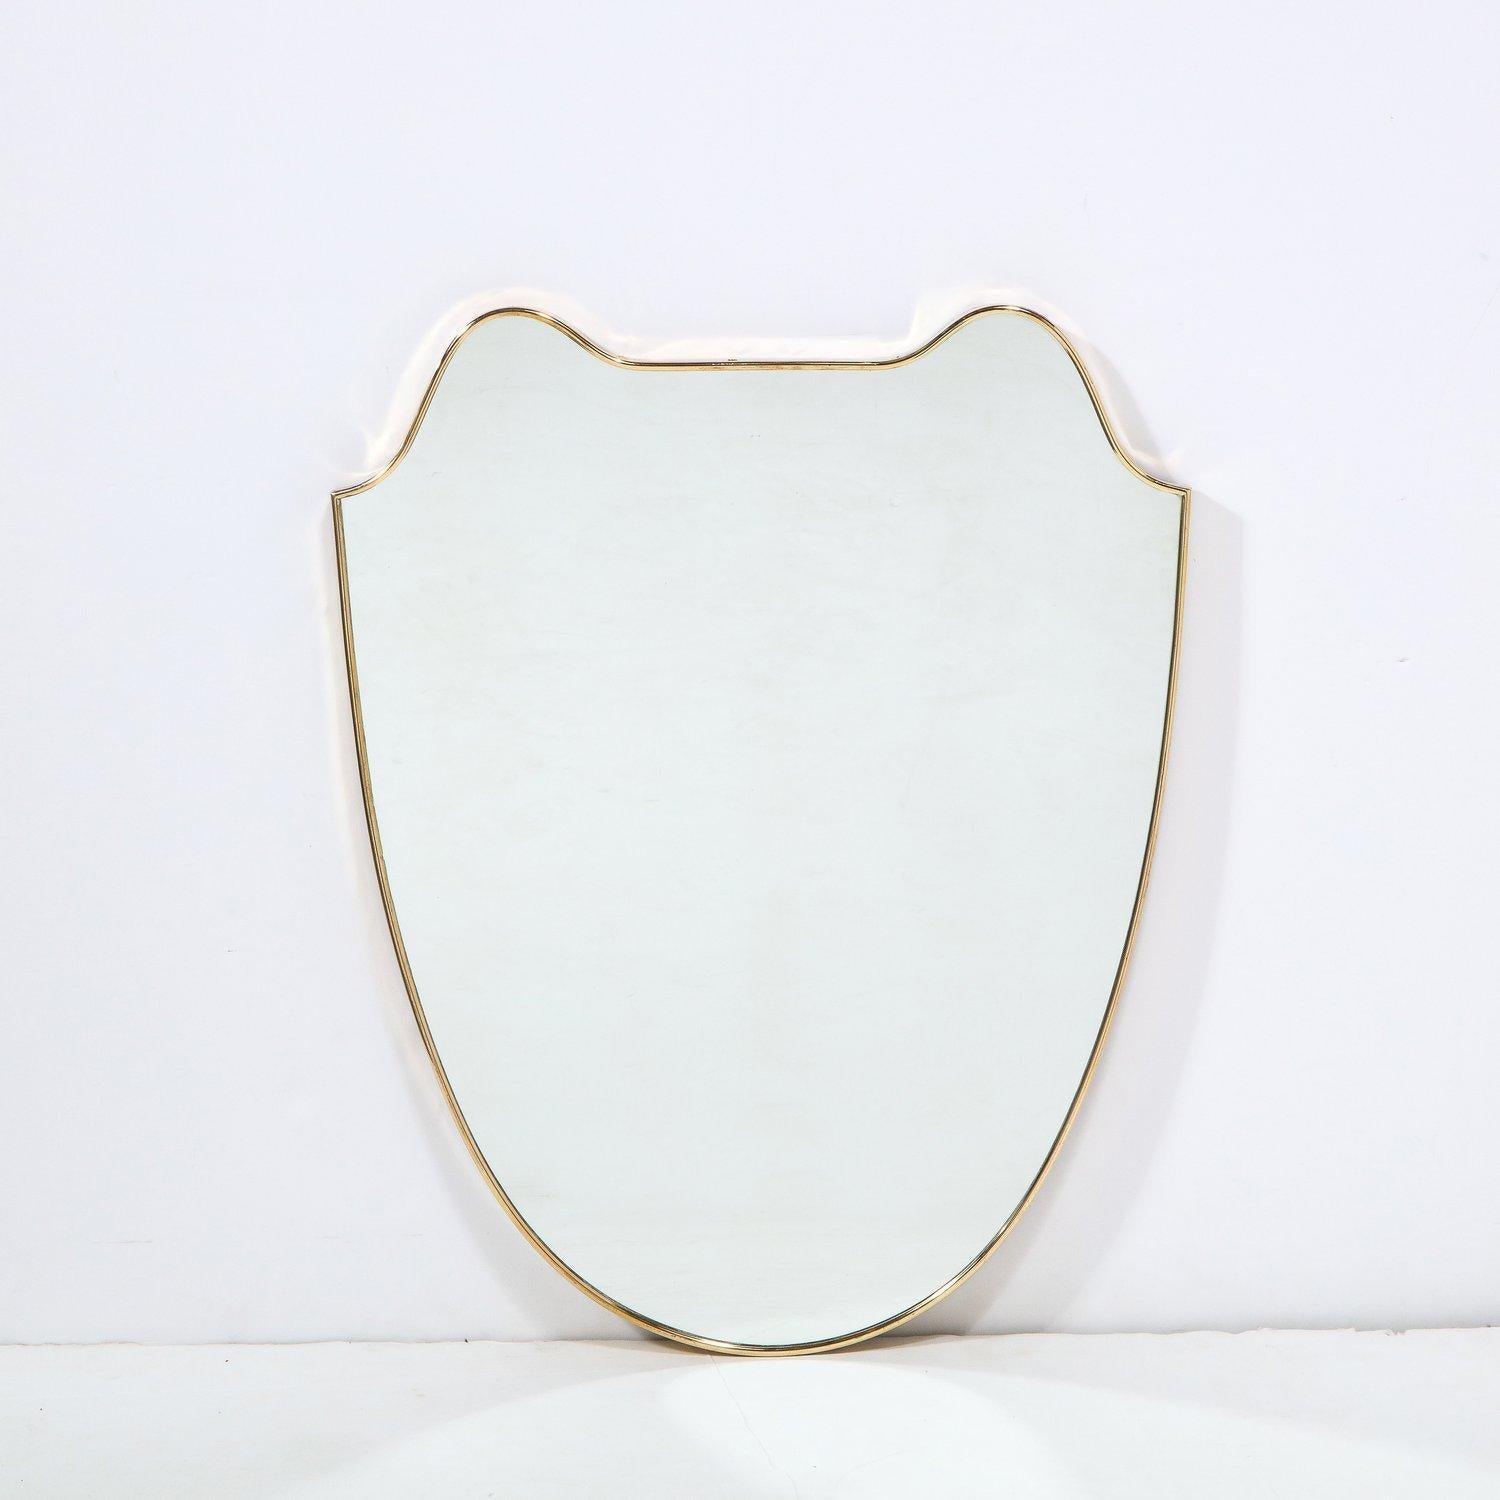 This elegant and austere Mid-Century Modern mirror was realized in Italy, circa 1950. It offers curvilinear forms with rounded shoulders in polished brass. The frame offers a subtle subtle elegance surrounding this unique form. With its clean